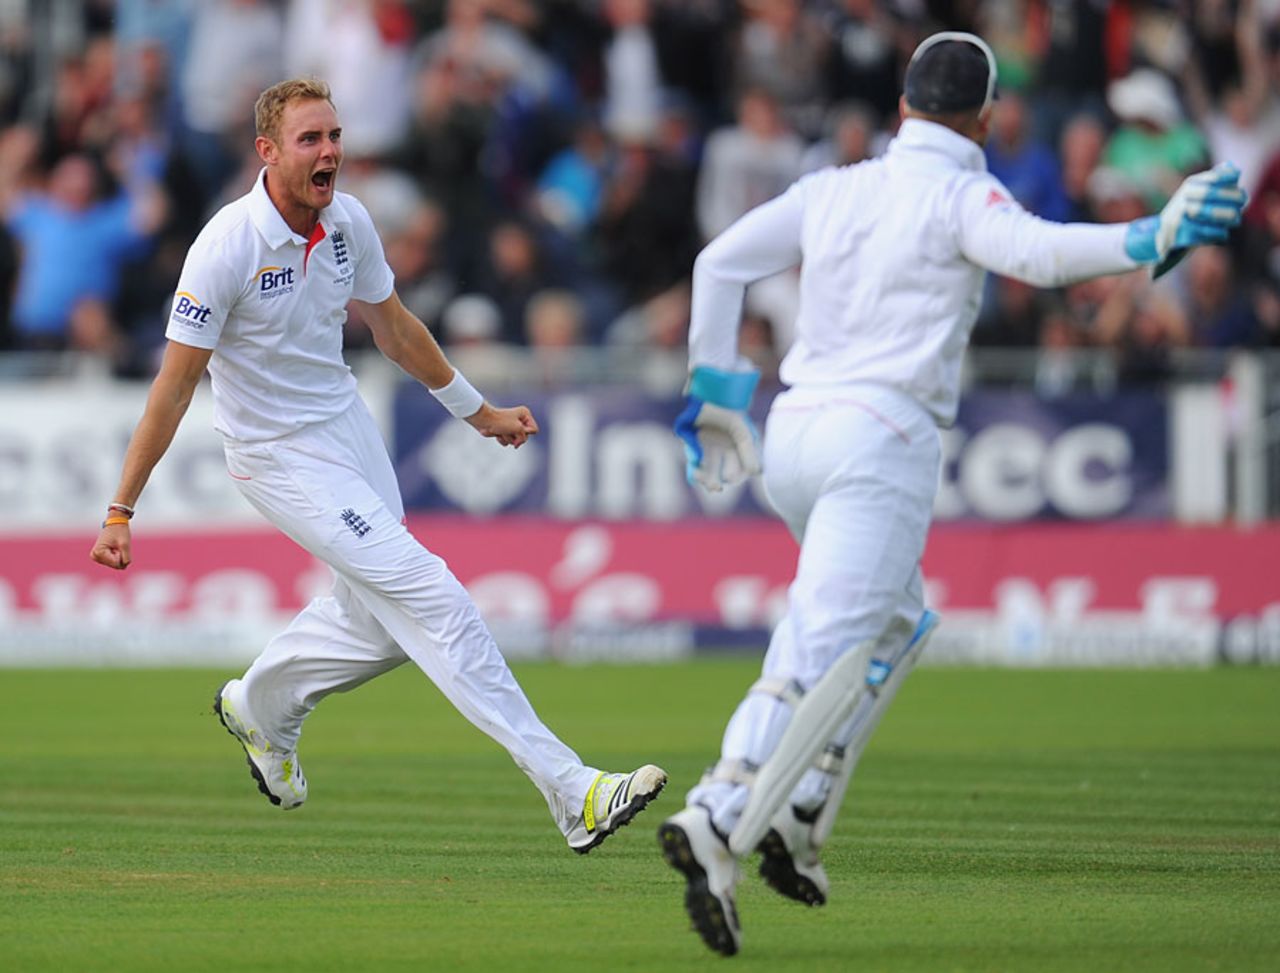 Stuart Broad's aggression turned the match on its head, England v Australia, 4th Investec Test, 4th day, Chester-le-Street, August 12, 2013